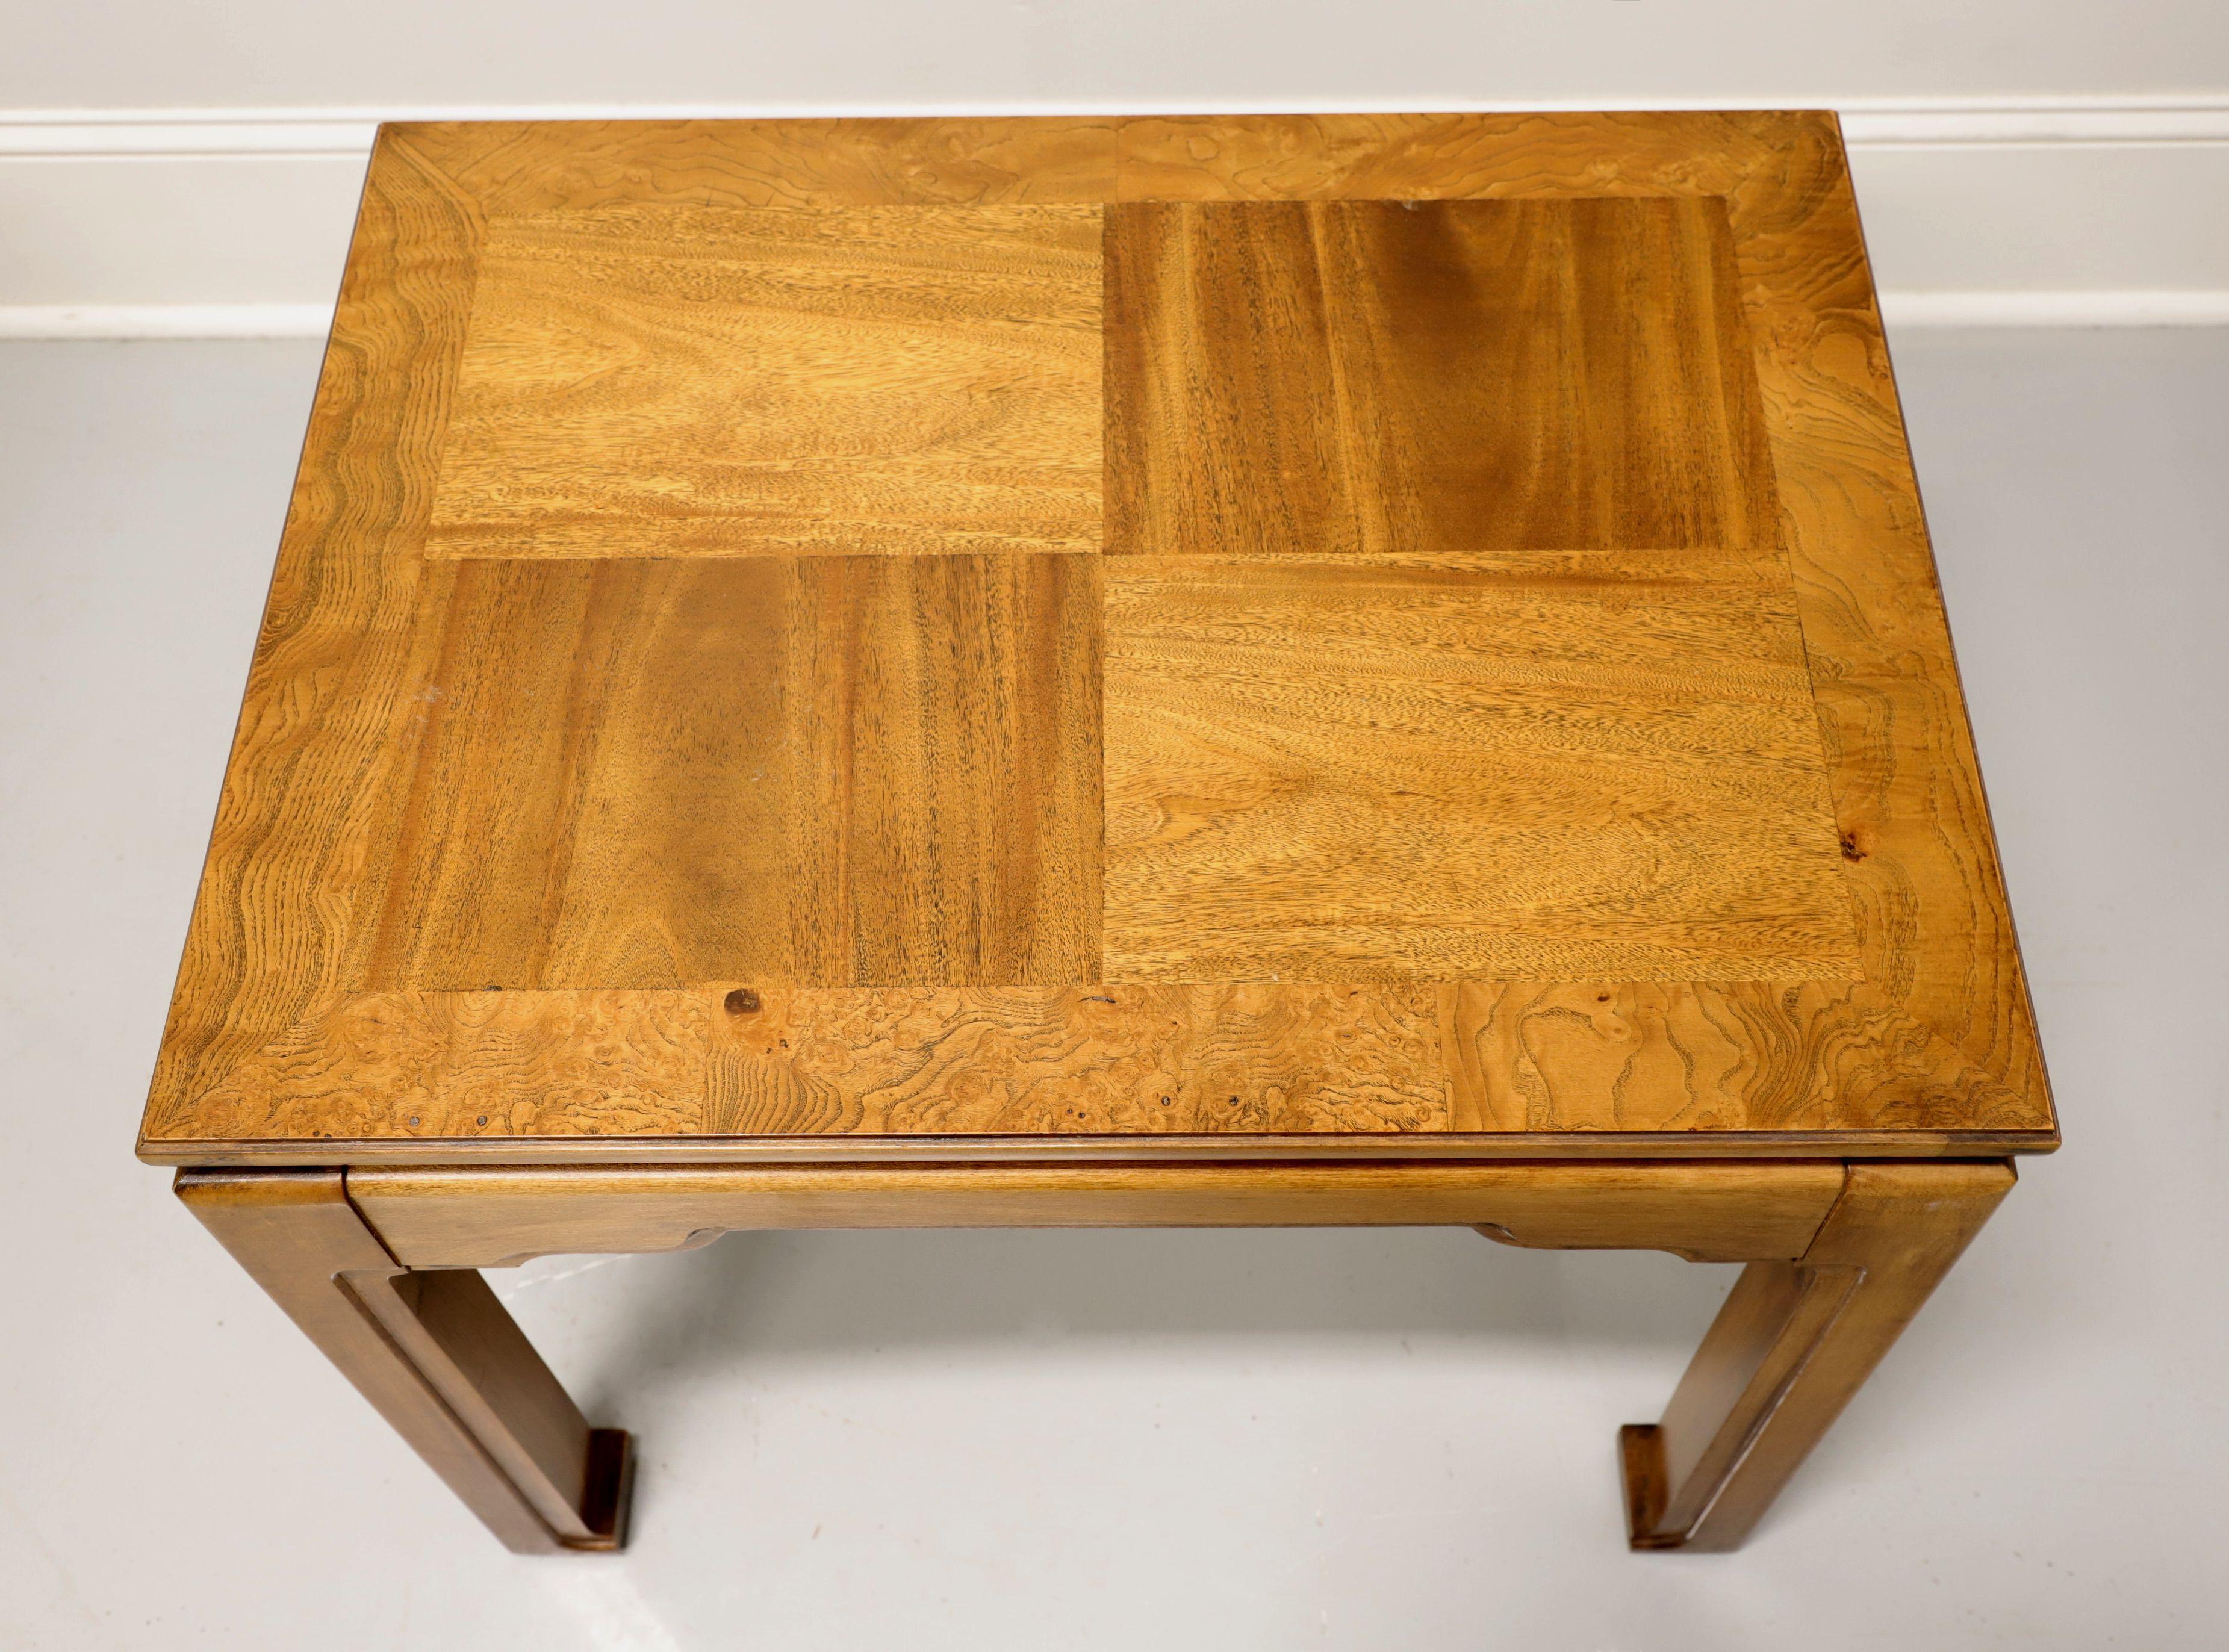 THOMASVILLE Burl Oak Asian Ming Influenced Parquetry End Side Tables - Pair In Good Condition For Sale In Charlotte, NC